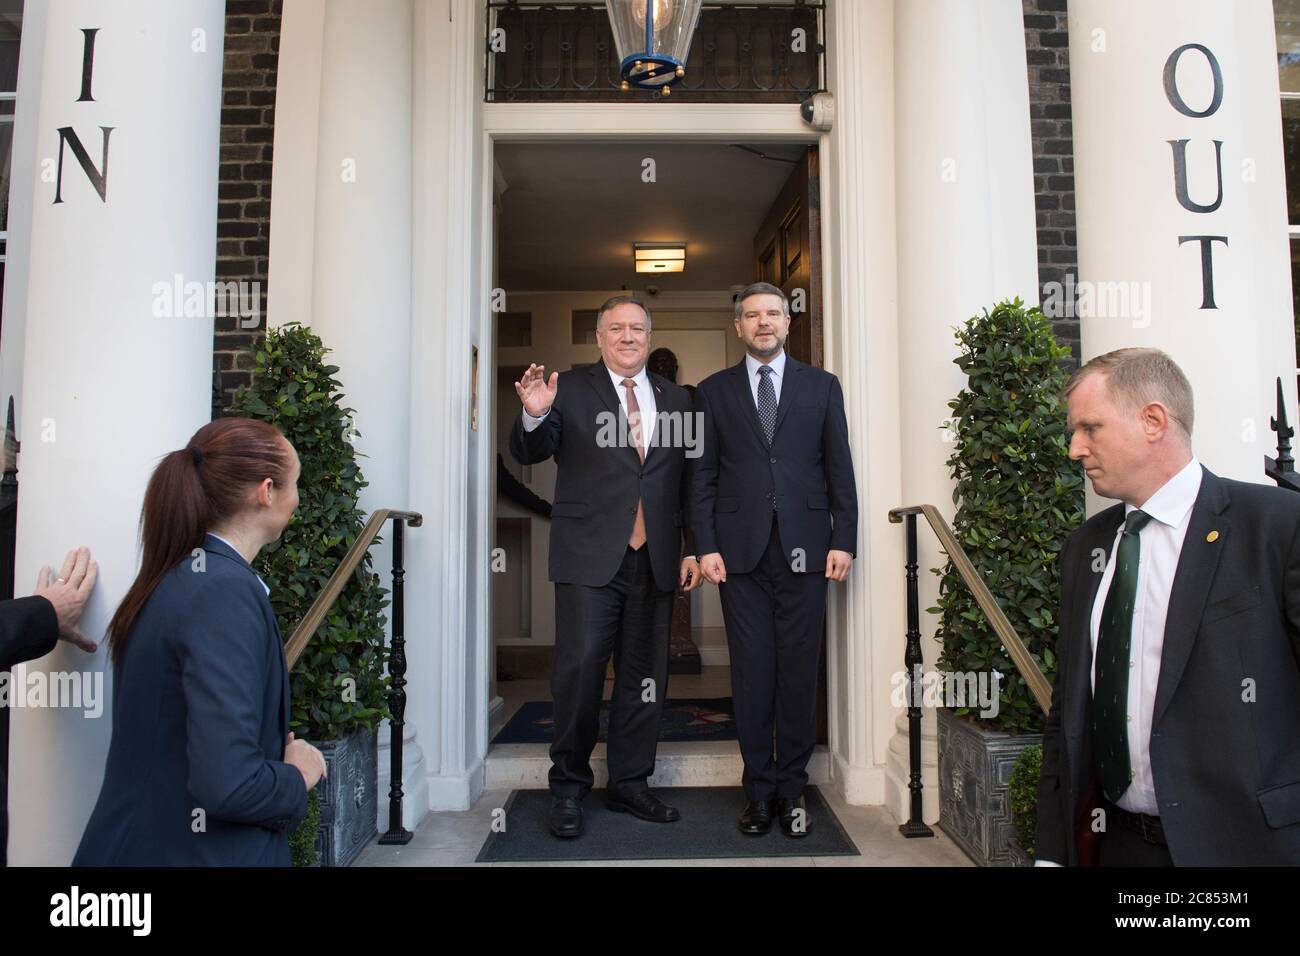 United States Secretary of State, Mike Pompeo (left) is greeted by Executive Director of the Henry Jackson Society, Alan Mendoza as he arrives at the In And Out Club in London to meet backbench MPs ahead of meetings with Prime Minister Boris Johnson and Foreign Secretary Dominic Raab. Stock Photo